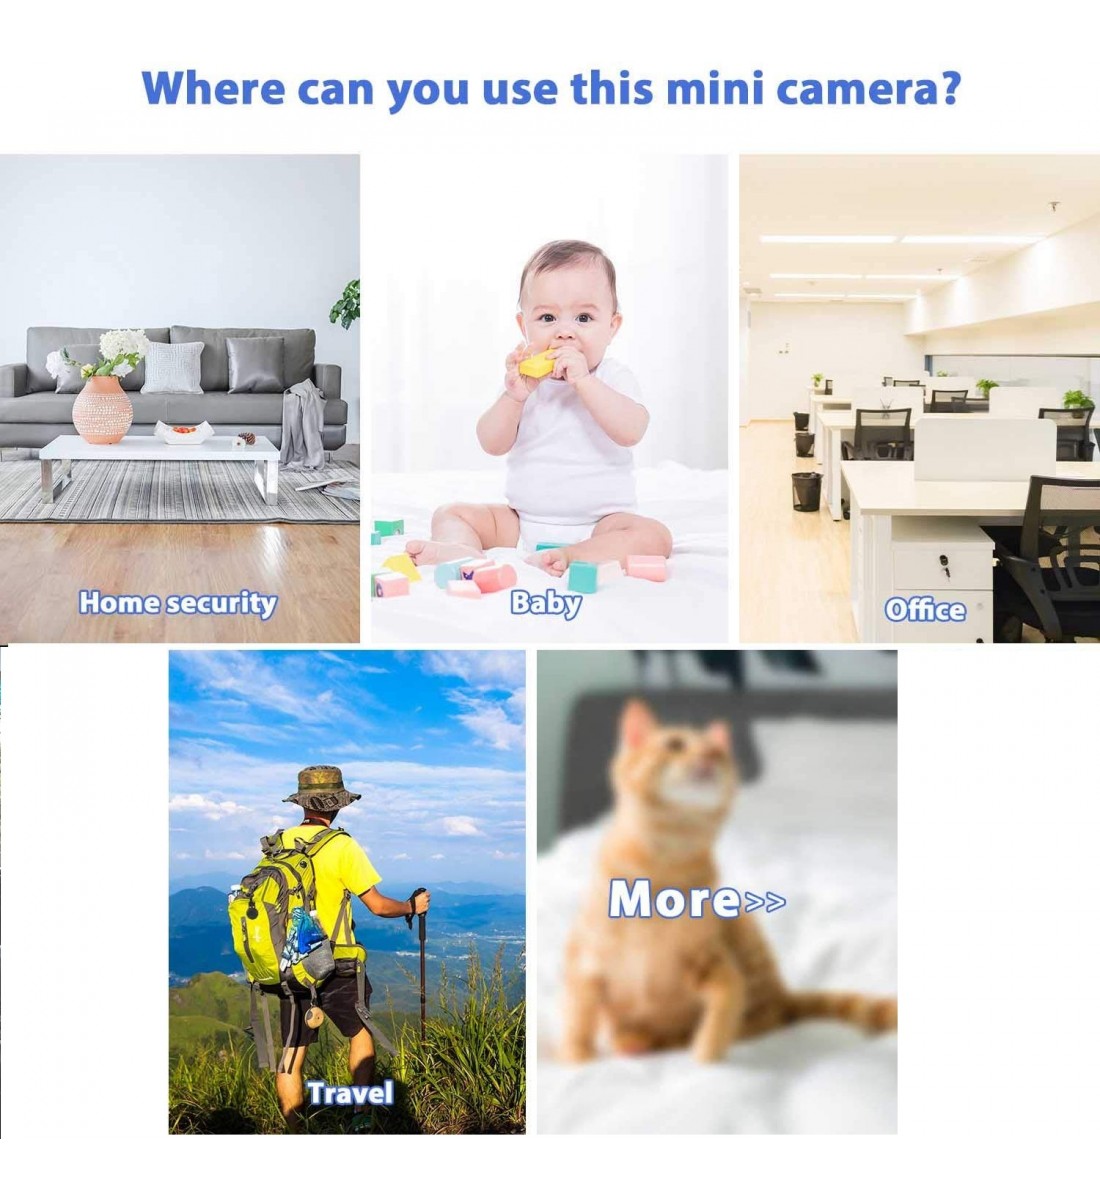 4K Real Ultra HD WiFi Hidden Spy Camera Mini Camera Wireless Motion Detection Nanny Cam Security System Video Remote View Camera Monitor Baby Office spy Cam App Camcorder Kid With 4000mah Battery (3)